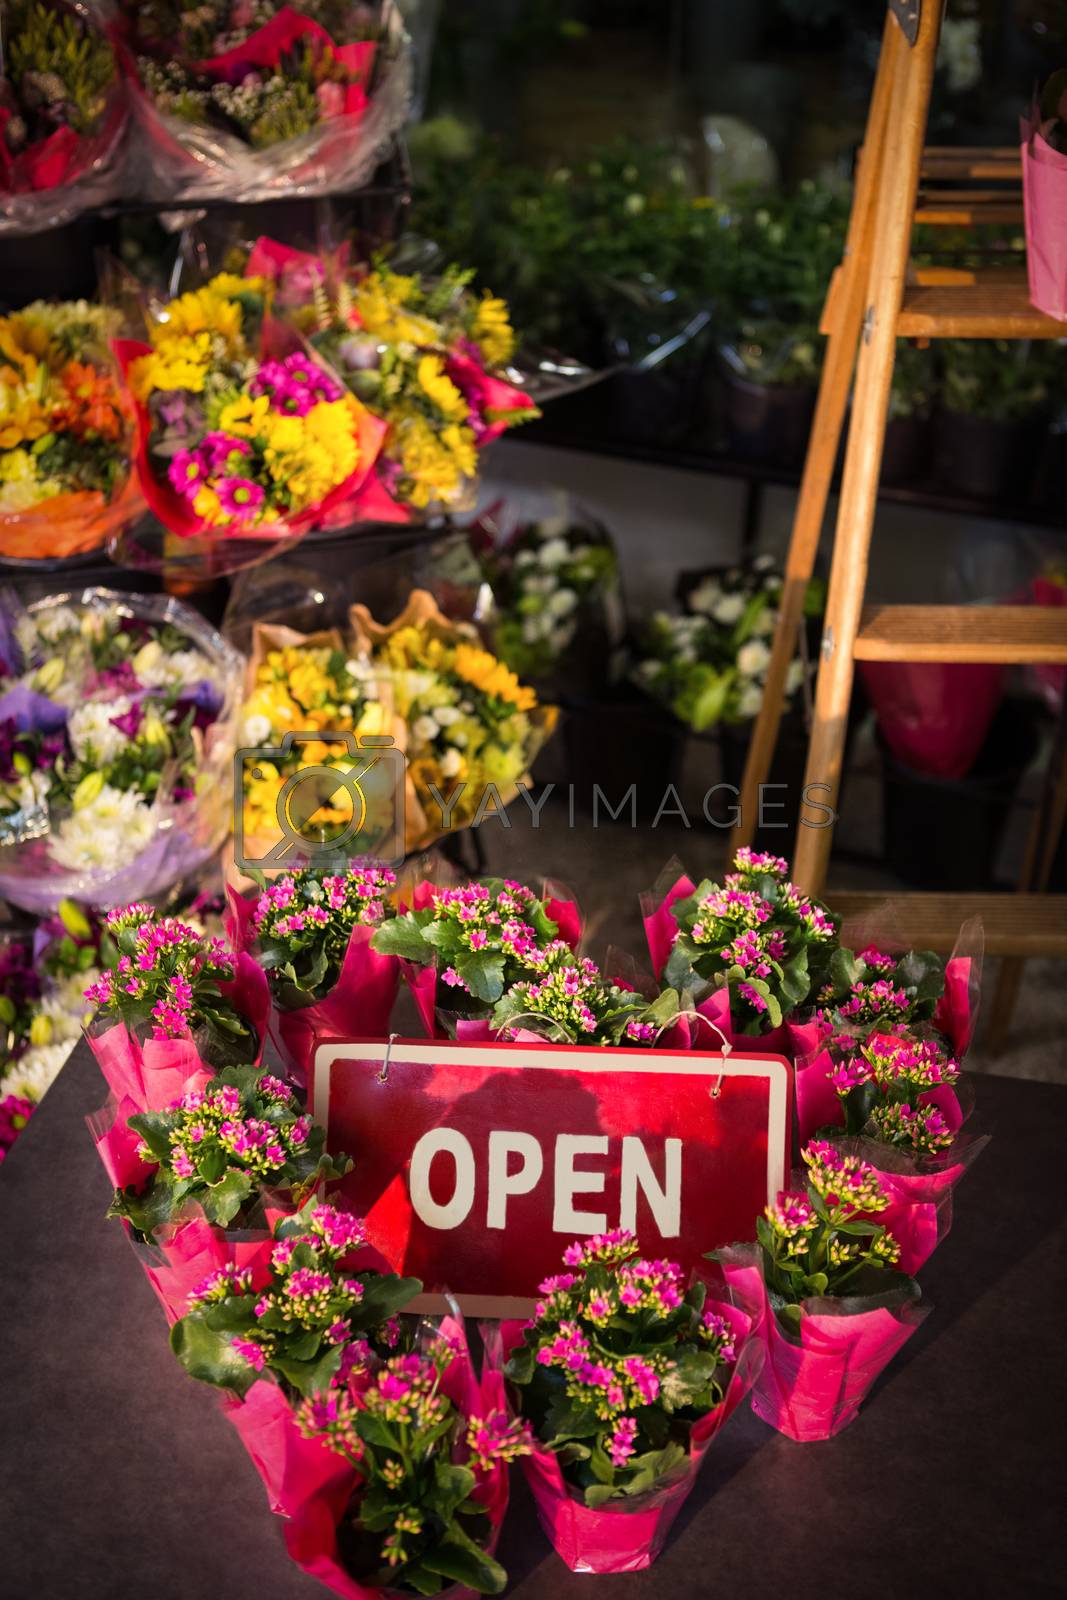 Royalty free image of Open signboard decorated with heart shape plant pots by Wavebreakmedia